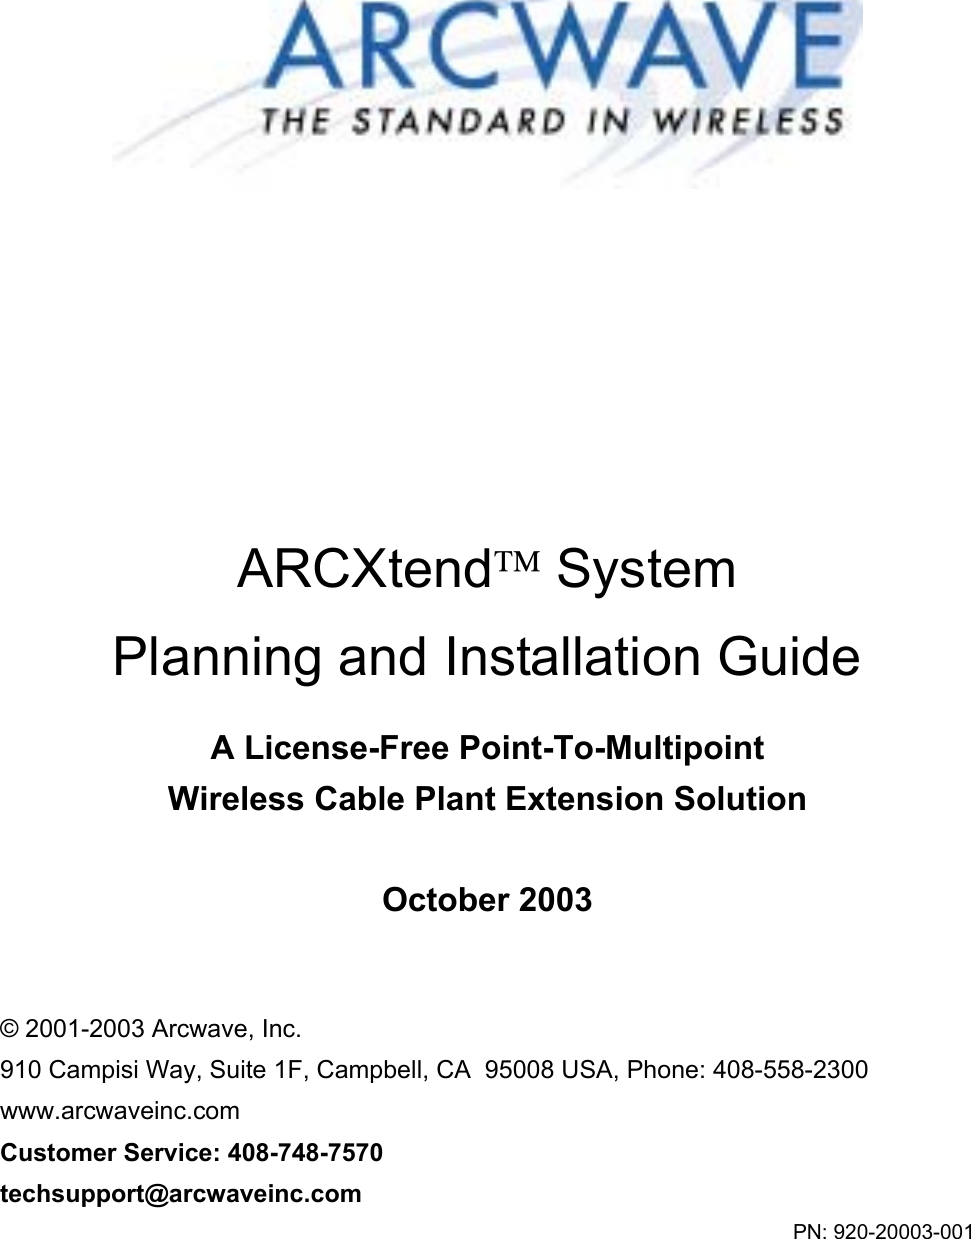  ARCXtend System Planning and Installation Guide  A License-Free Point-To-Multipoint Wireless Cable Plant Extension Solution  October 2003   © 2001-2003 Arcwave, Inc. 910 Campisi Way, Suite 1F, Campbell, CA  95008 USA, Phone: 408-558-2300 www.arcwaveinc.com Customer Service: 408-748-7570 techsupport@arcwaveinc.com PN: 920-20003-001 